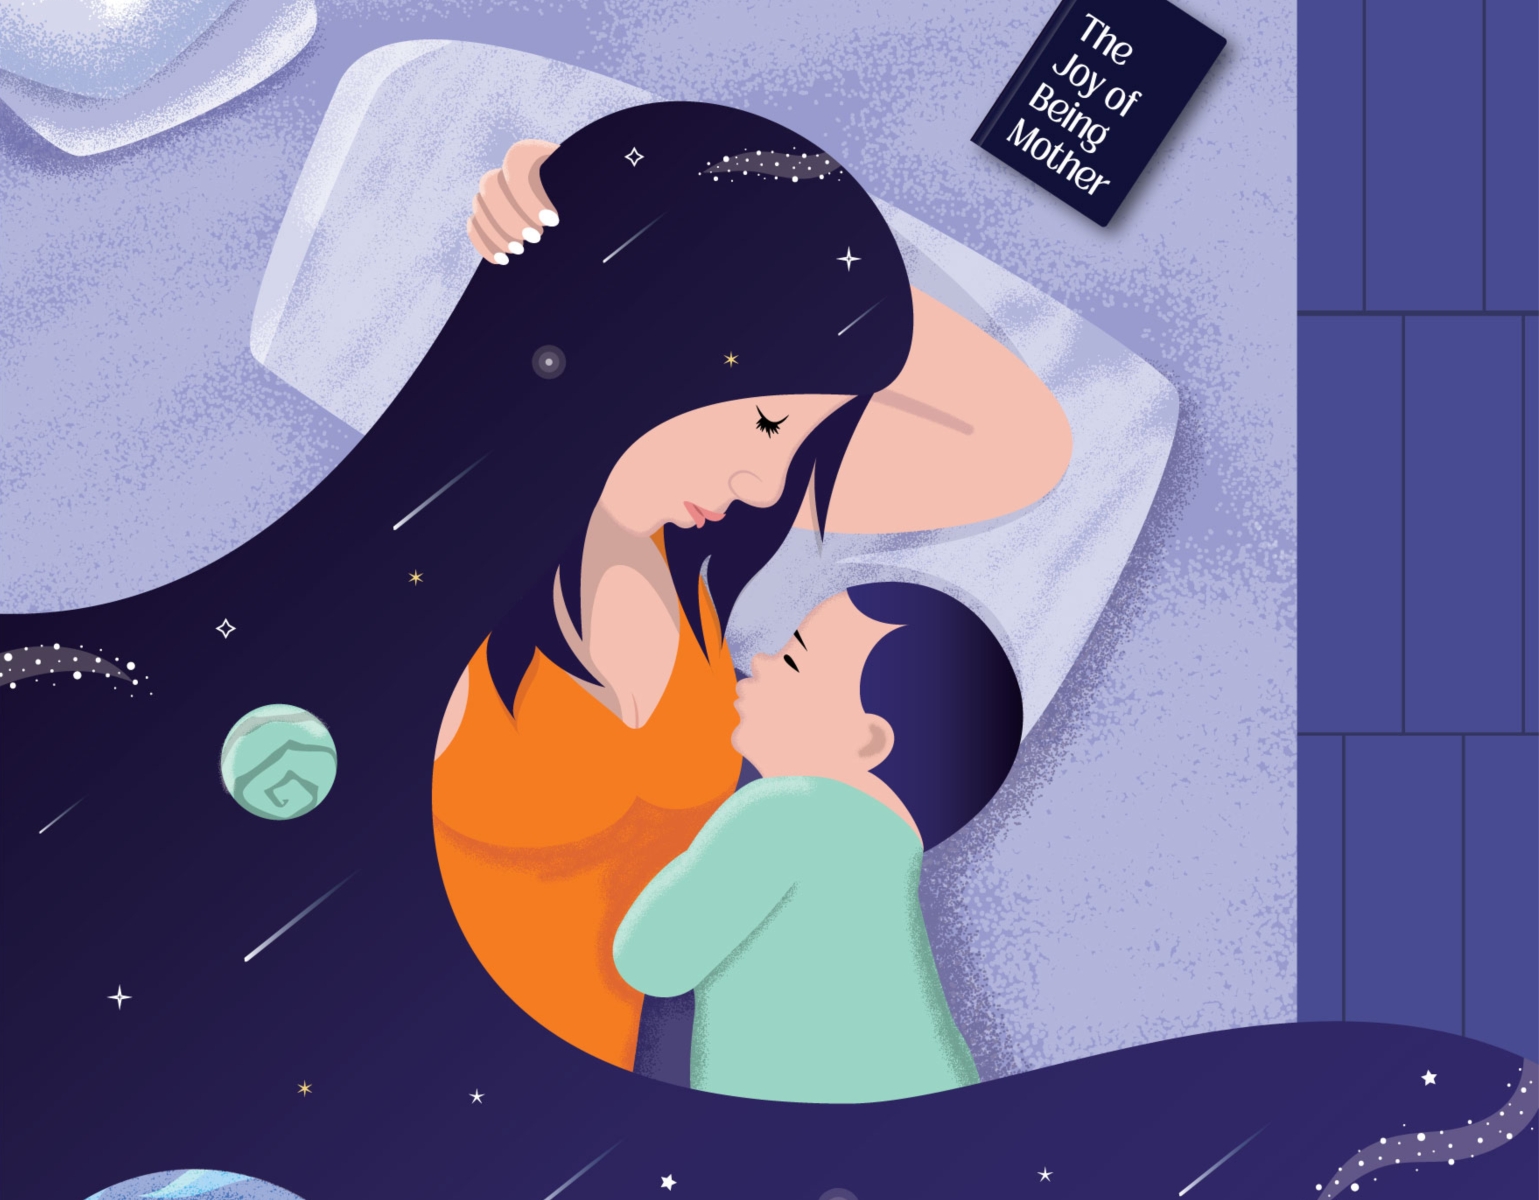 Mother and child sleeping | Mother's Day by Skephic Design on Dribbble